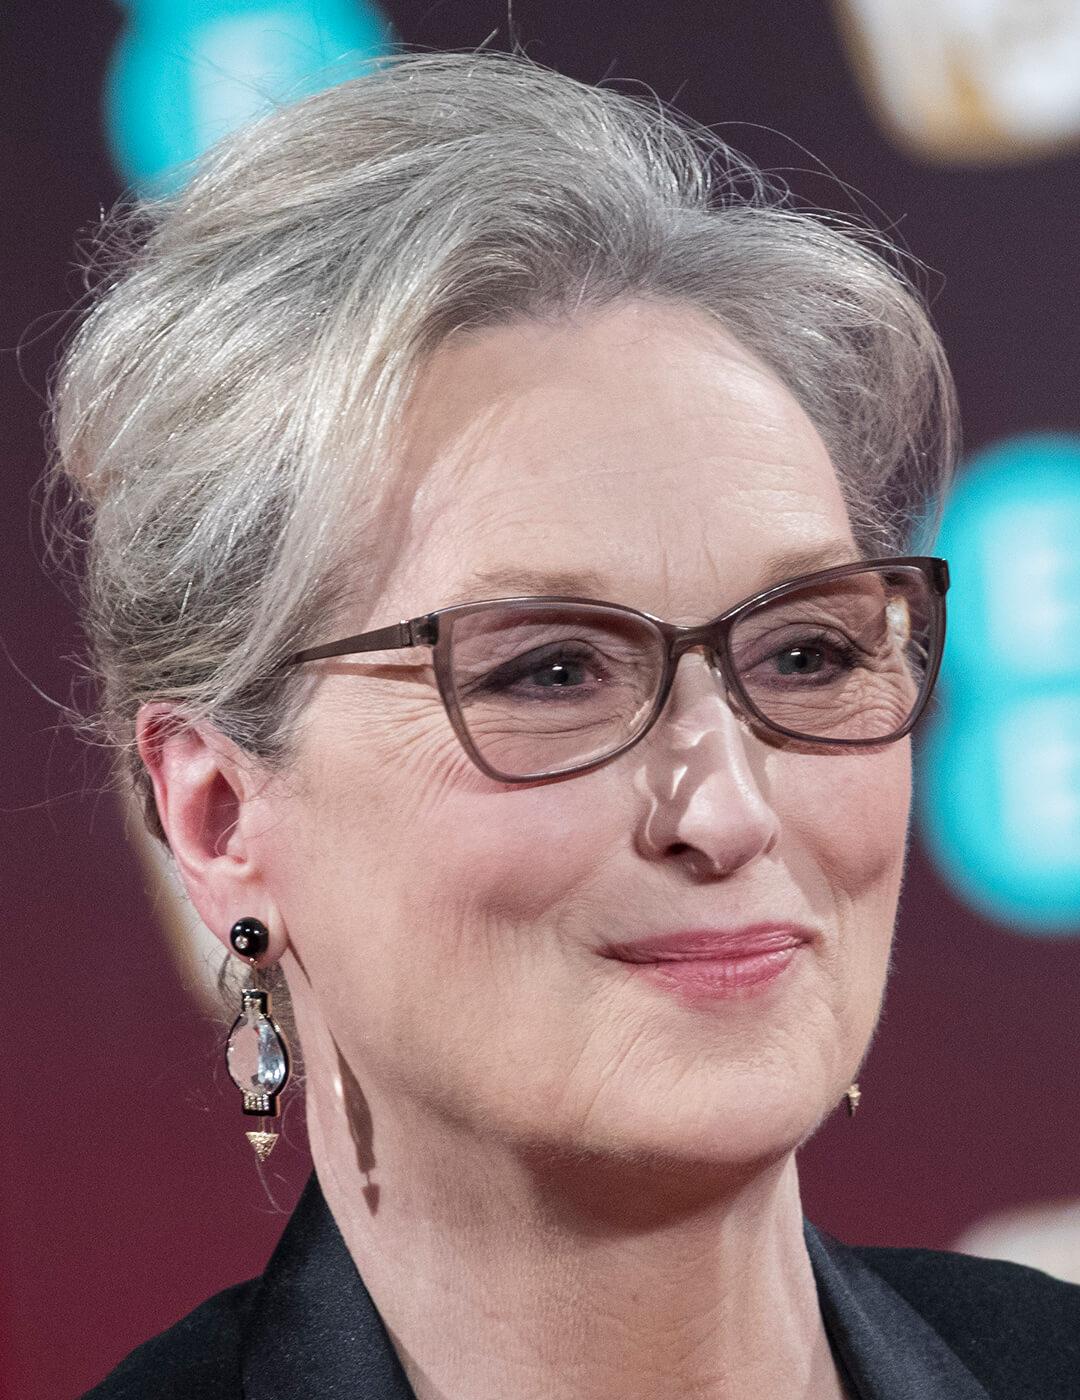 A photo of Meryl Streep with a gradual gray updo hairstyle